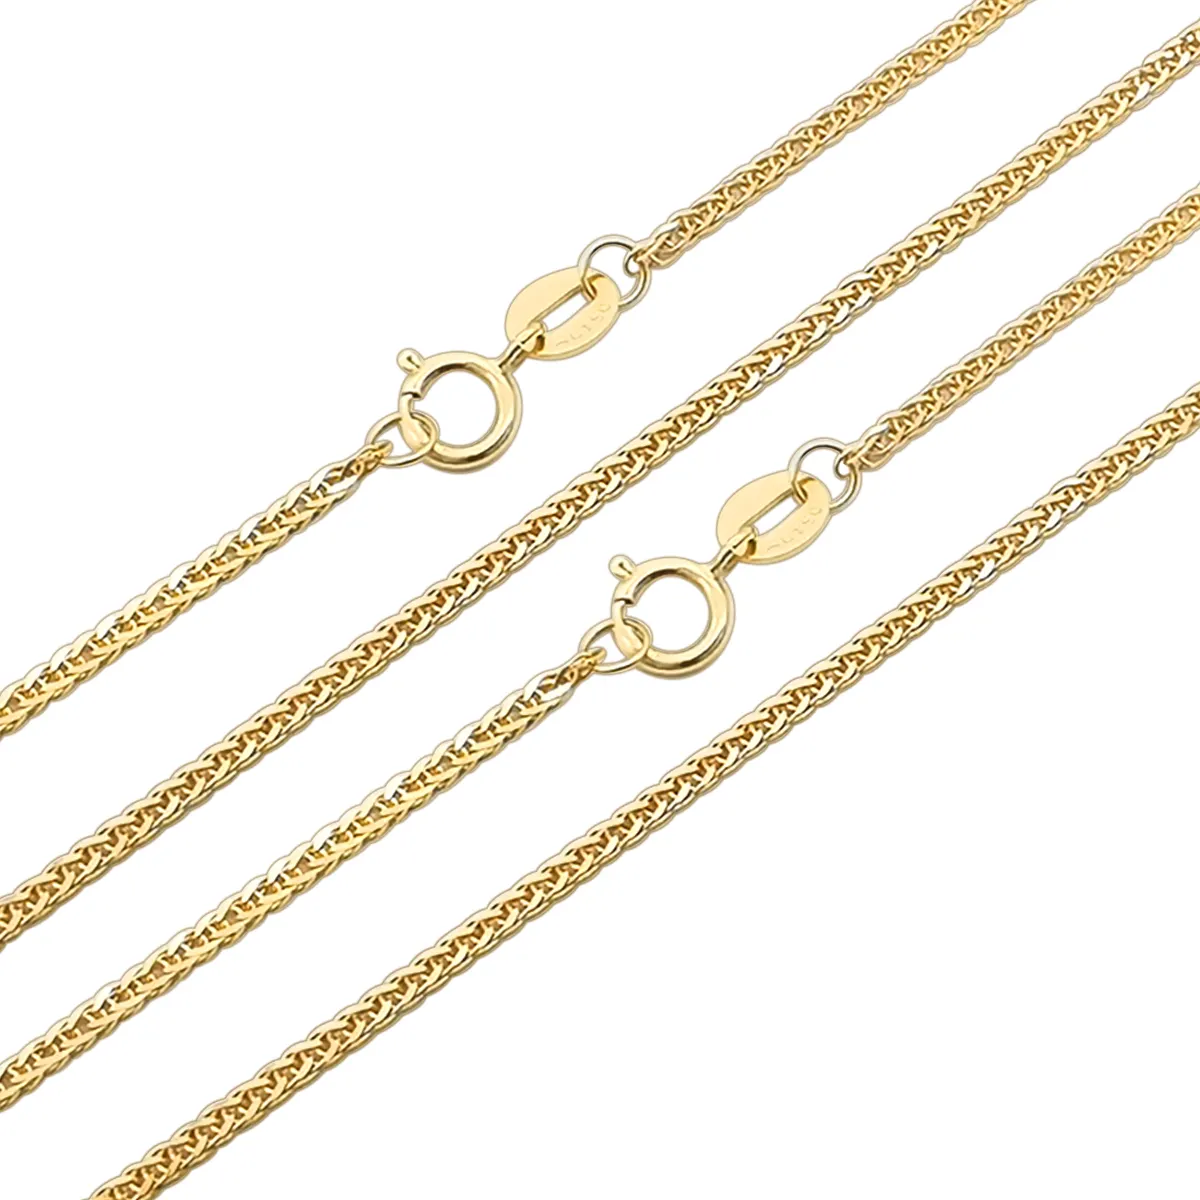 Hip Hop Fashion Style Real 18K Solid Gold 1.5mm Thicker Chopin Chain Necklace For Men And Women